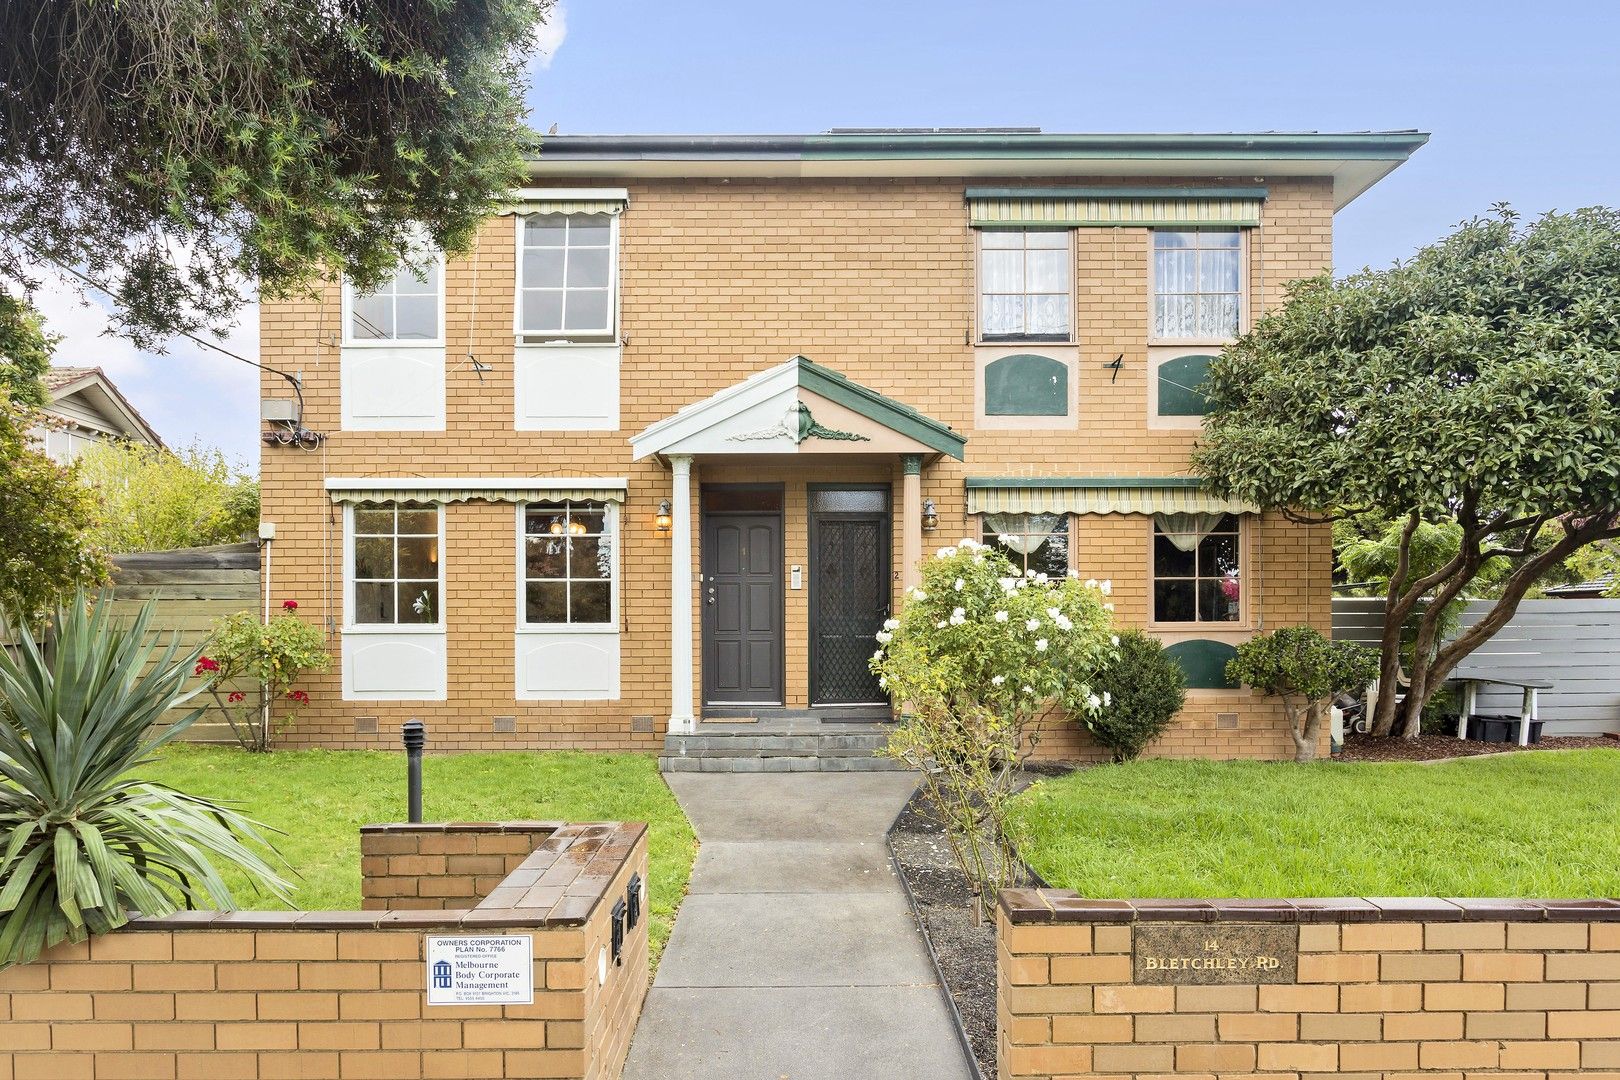 1/14 Bletchley Road, Hughesdale VIC 3166, Image 0